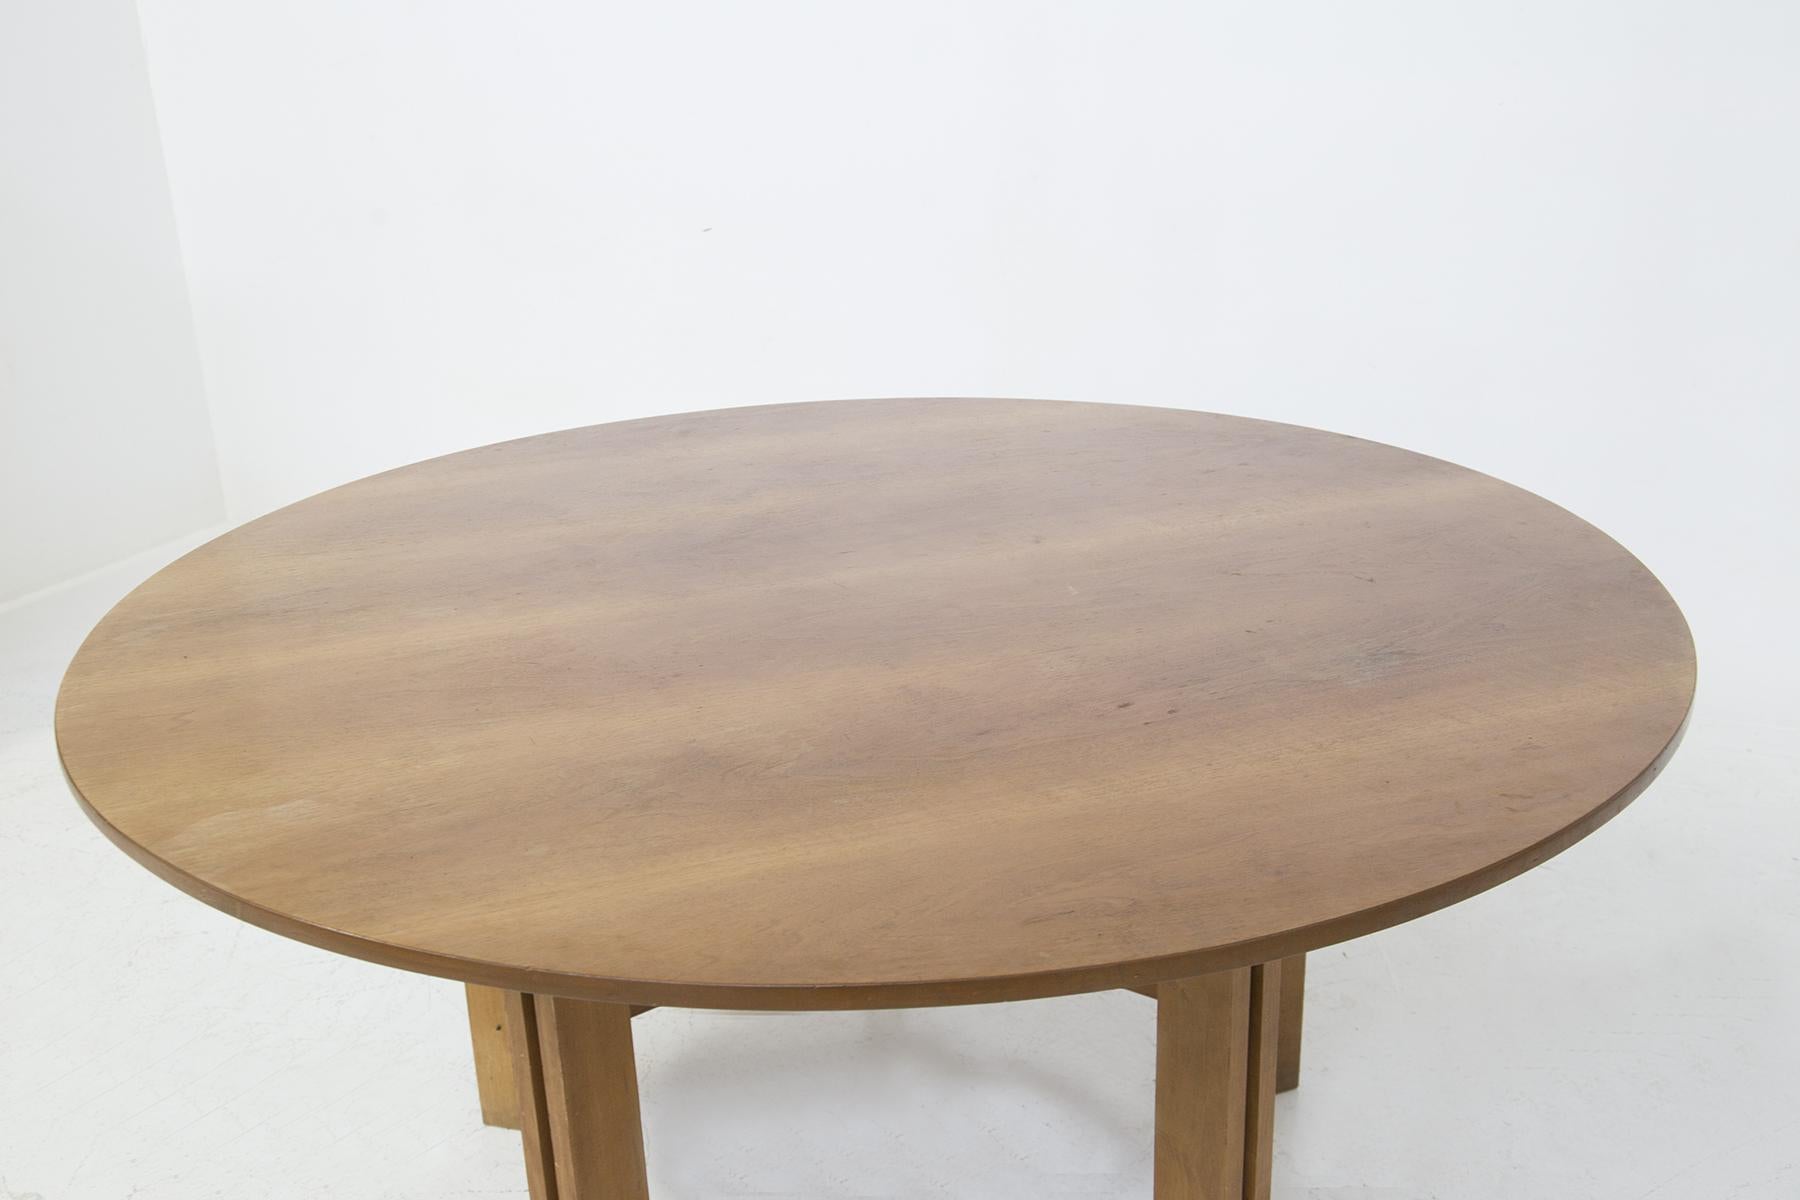 Beautiful round table designed by three great designers Vittorio Gregotti, Lodovico Meneghetti and Giotto Stoppino, of fine Italian manufacture from the 1950s. UNIQUE PIECE.
The table is made entirely of wood with hard, outlined geometric